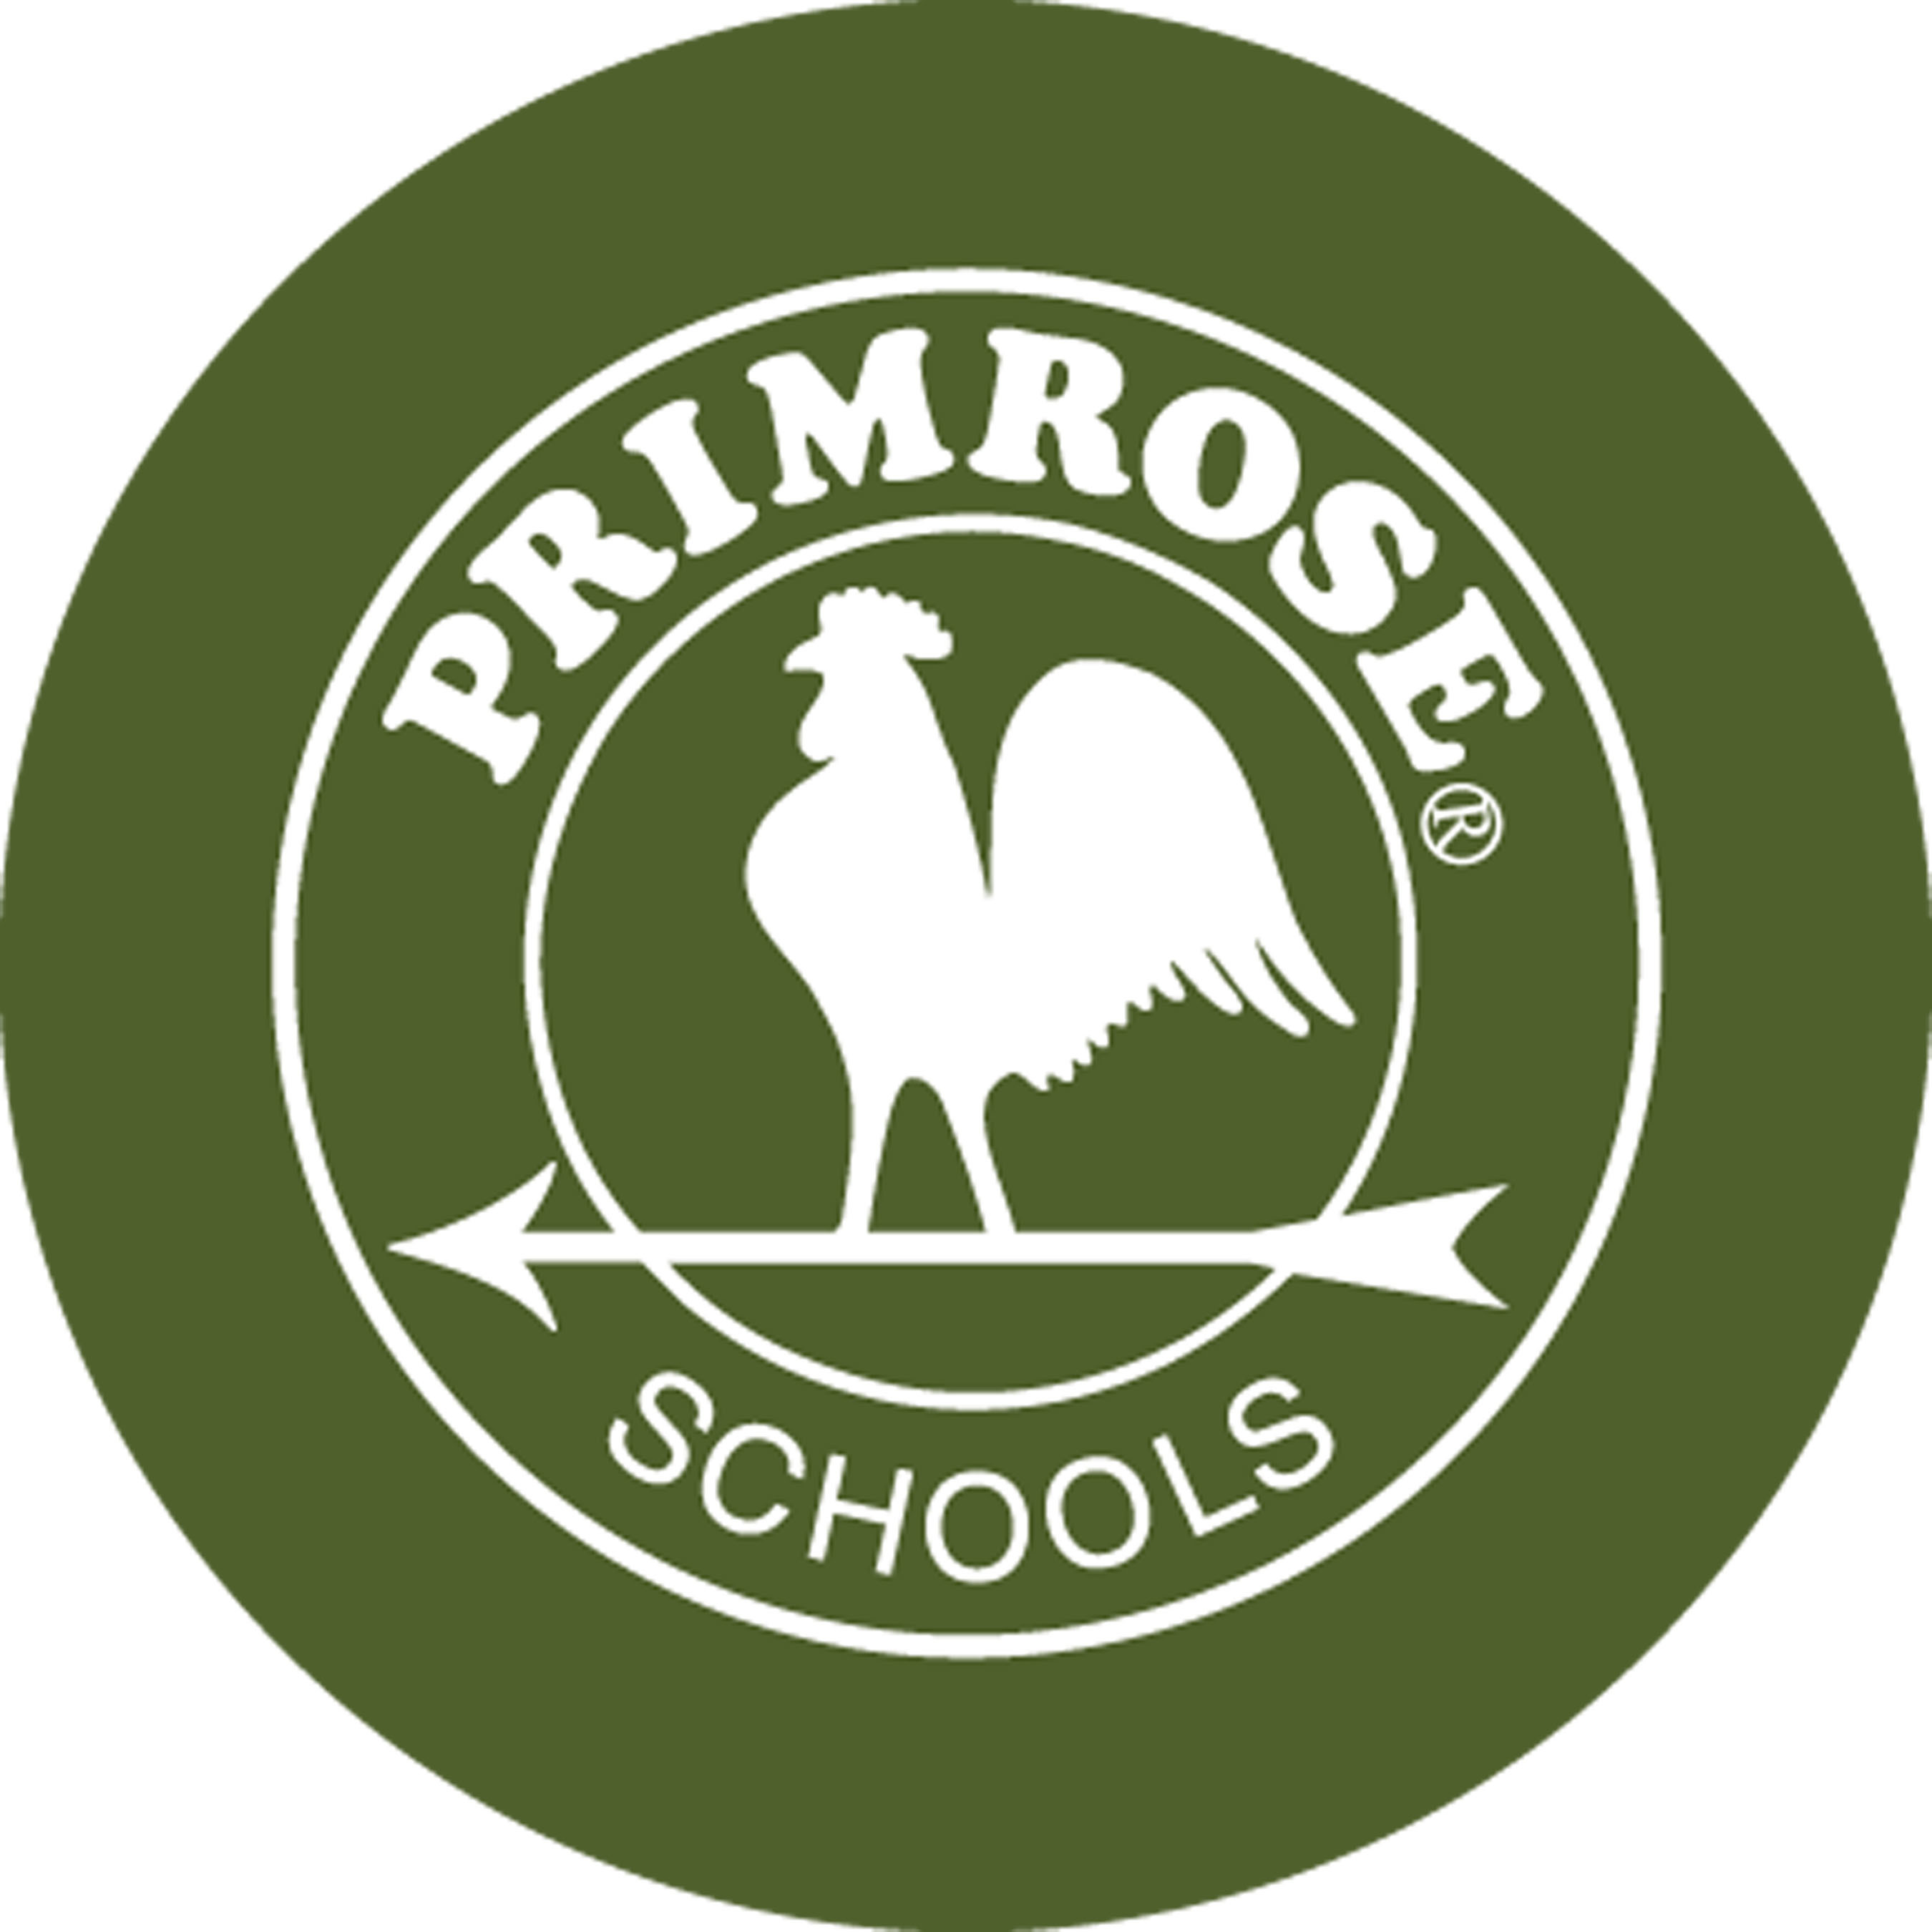 Primrose Schools is the nation's leader in providing a premier early education and care experience.